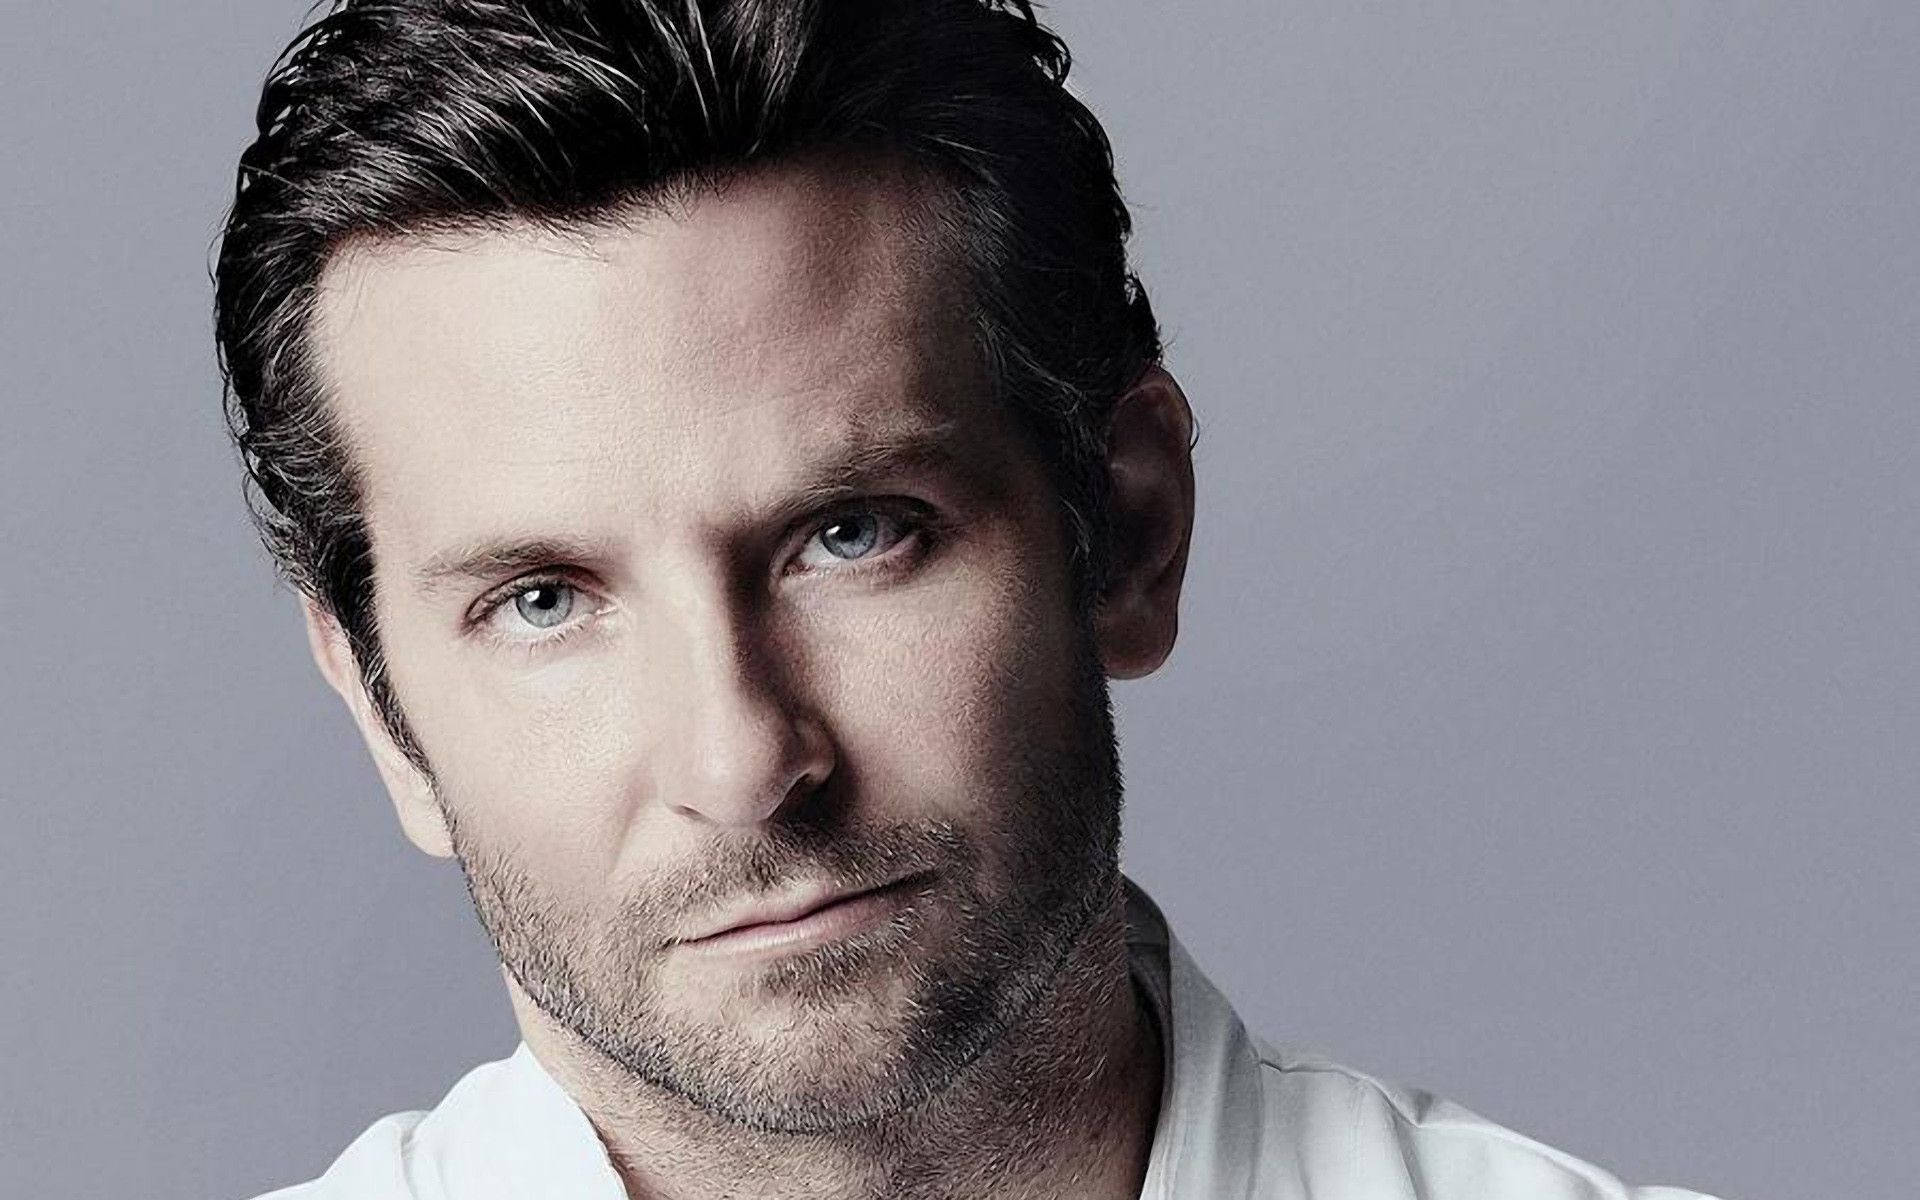 Bradley Cooper, Hollywood's Charming A-lister Wallpaper